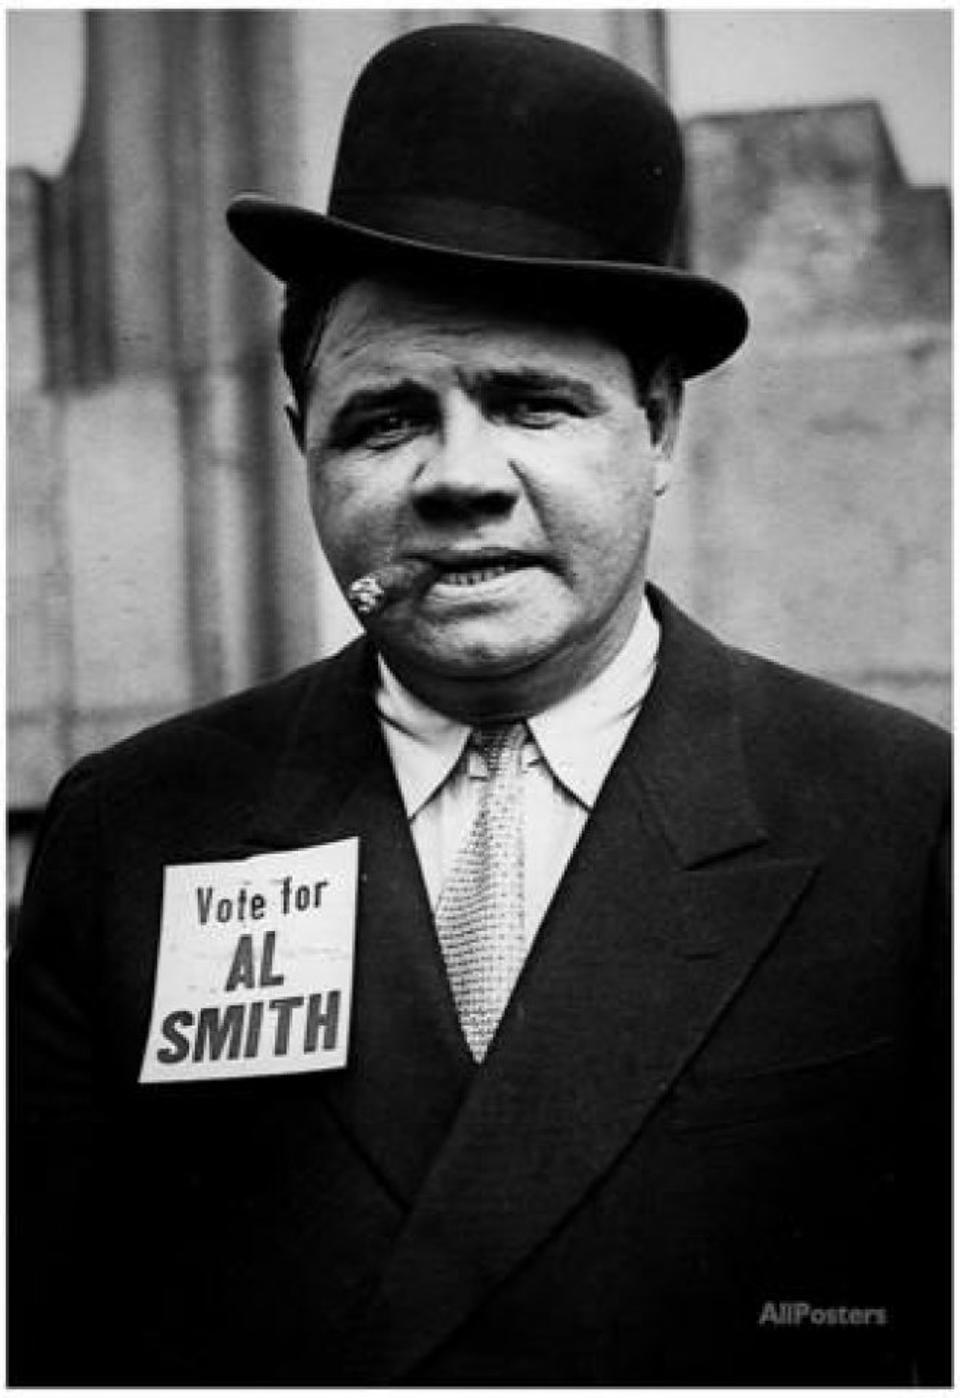 babe_ruth_campaigning_for_al_smith_archival_photo_sports_poster_print__1487127572_52177 copy.jpg